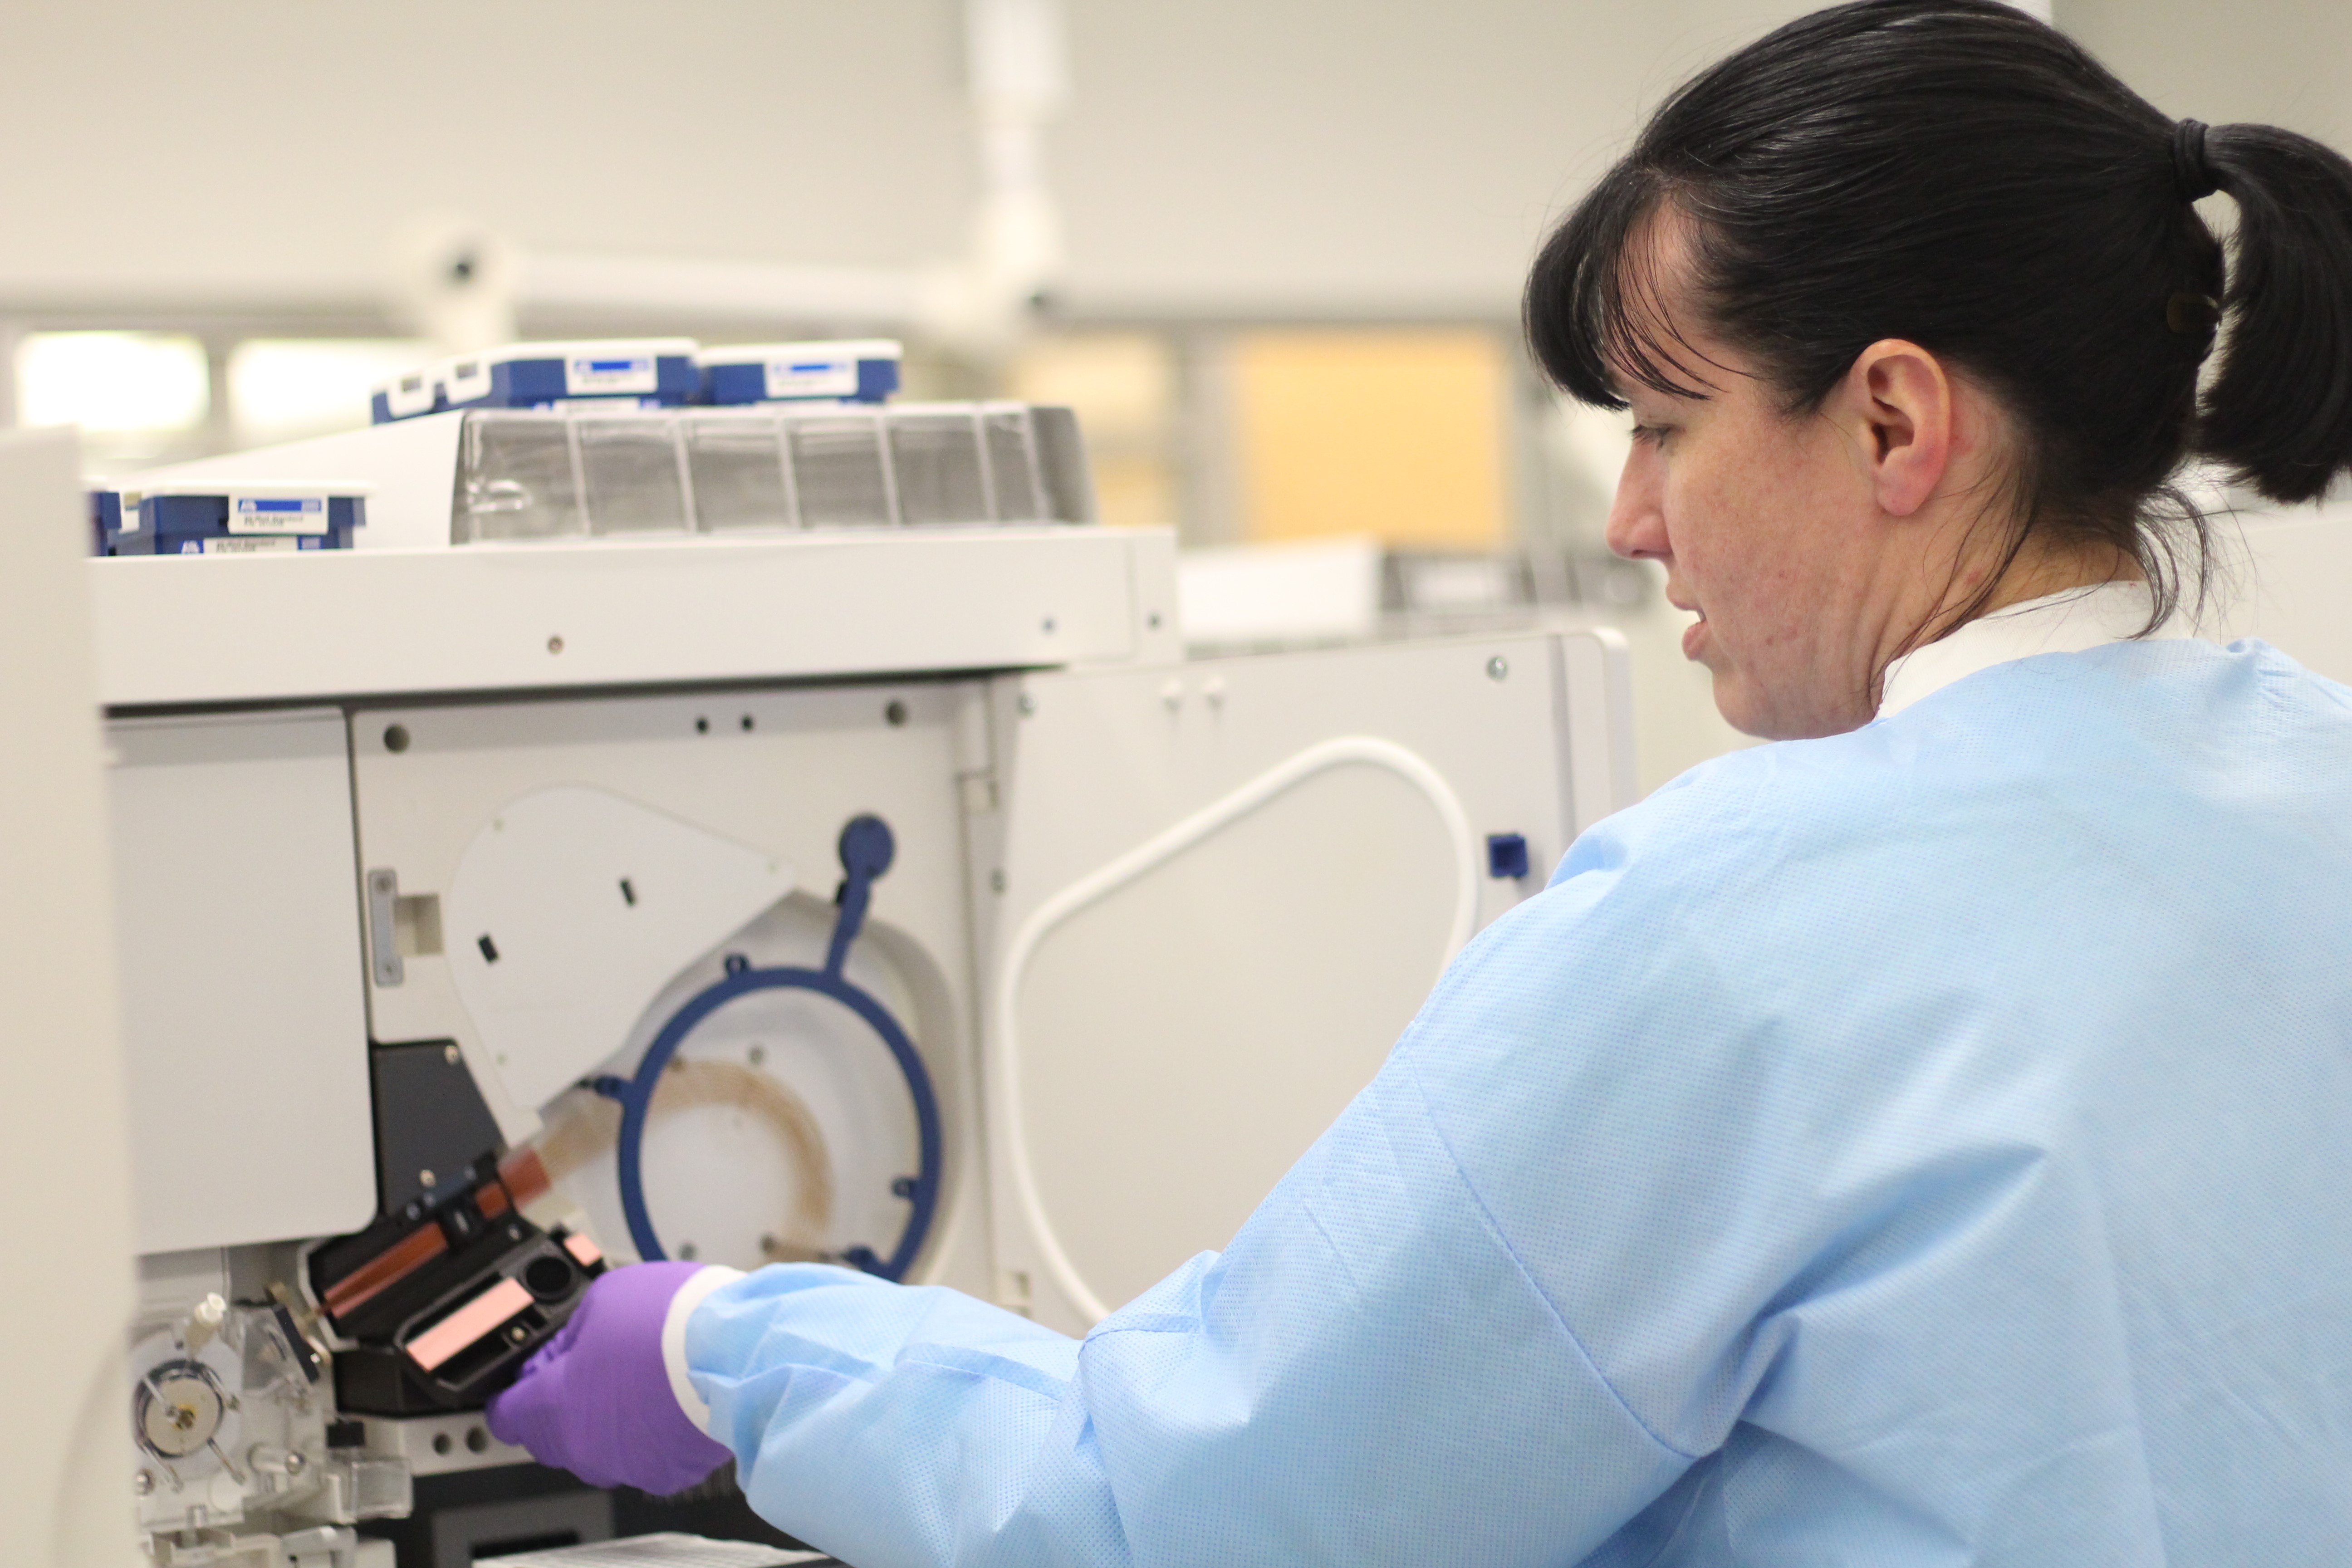 Michelle Collins demonstrates how to use one of the machines that processes DNA samples. (Photo by Anne Hillman/Alaska Public Media)